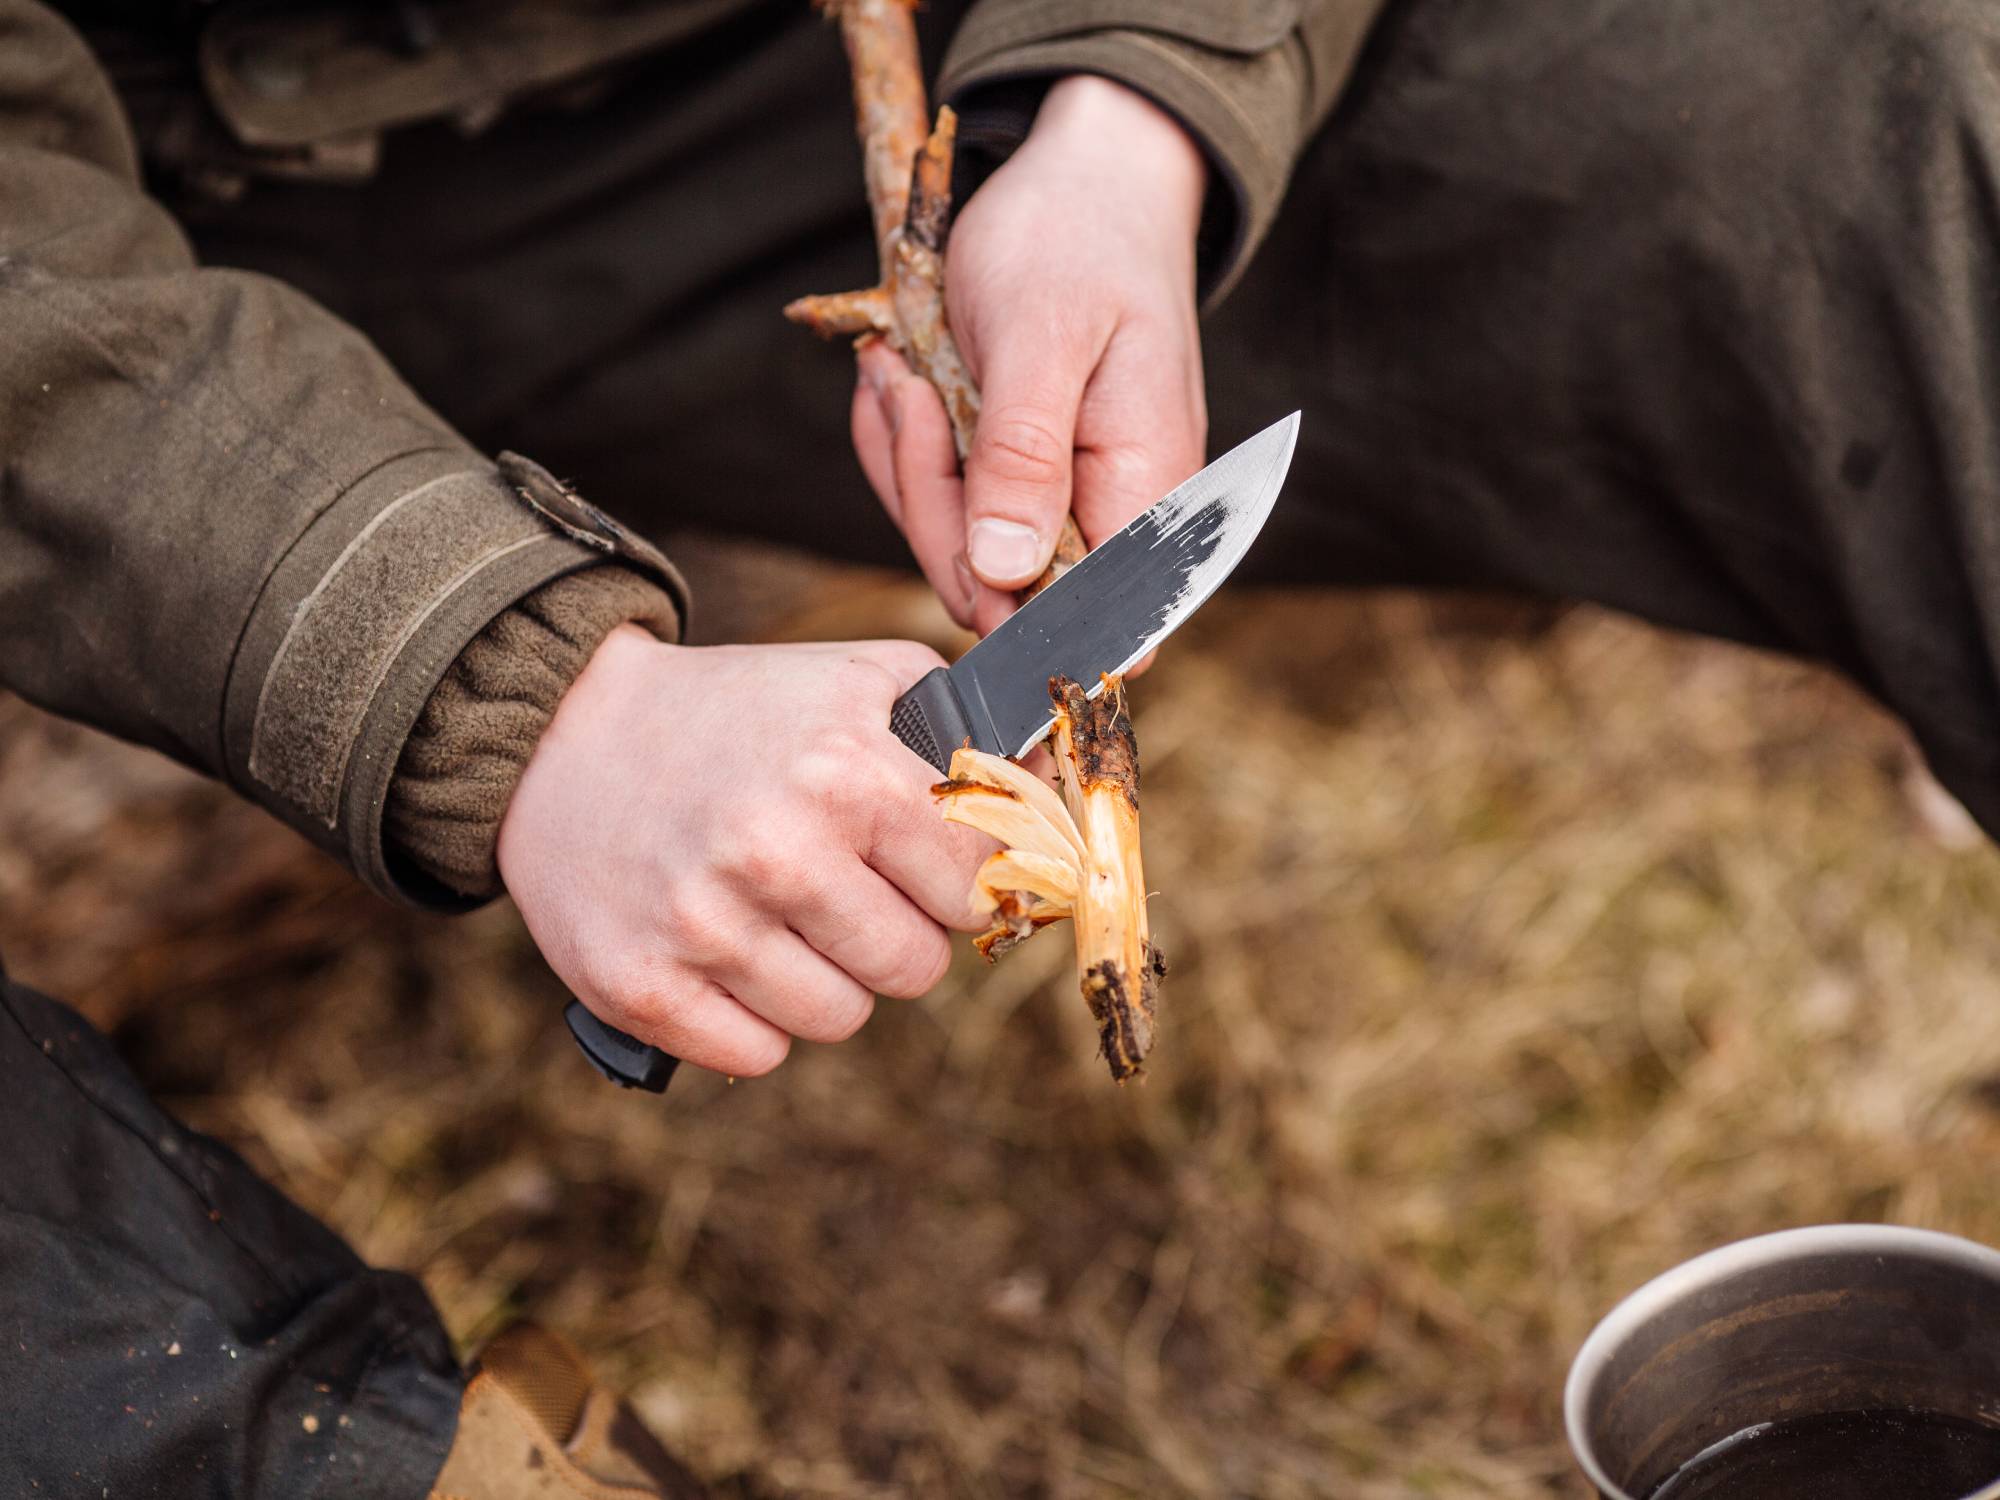 An outdoor adventurer using their carefully selected outdoor knife to whittle wood for a campfire.